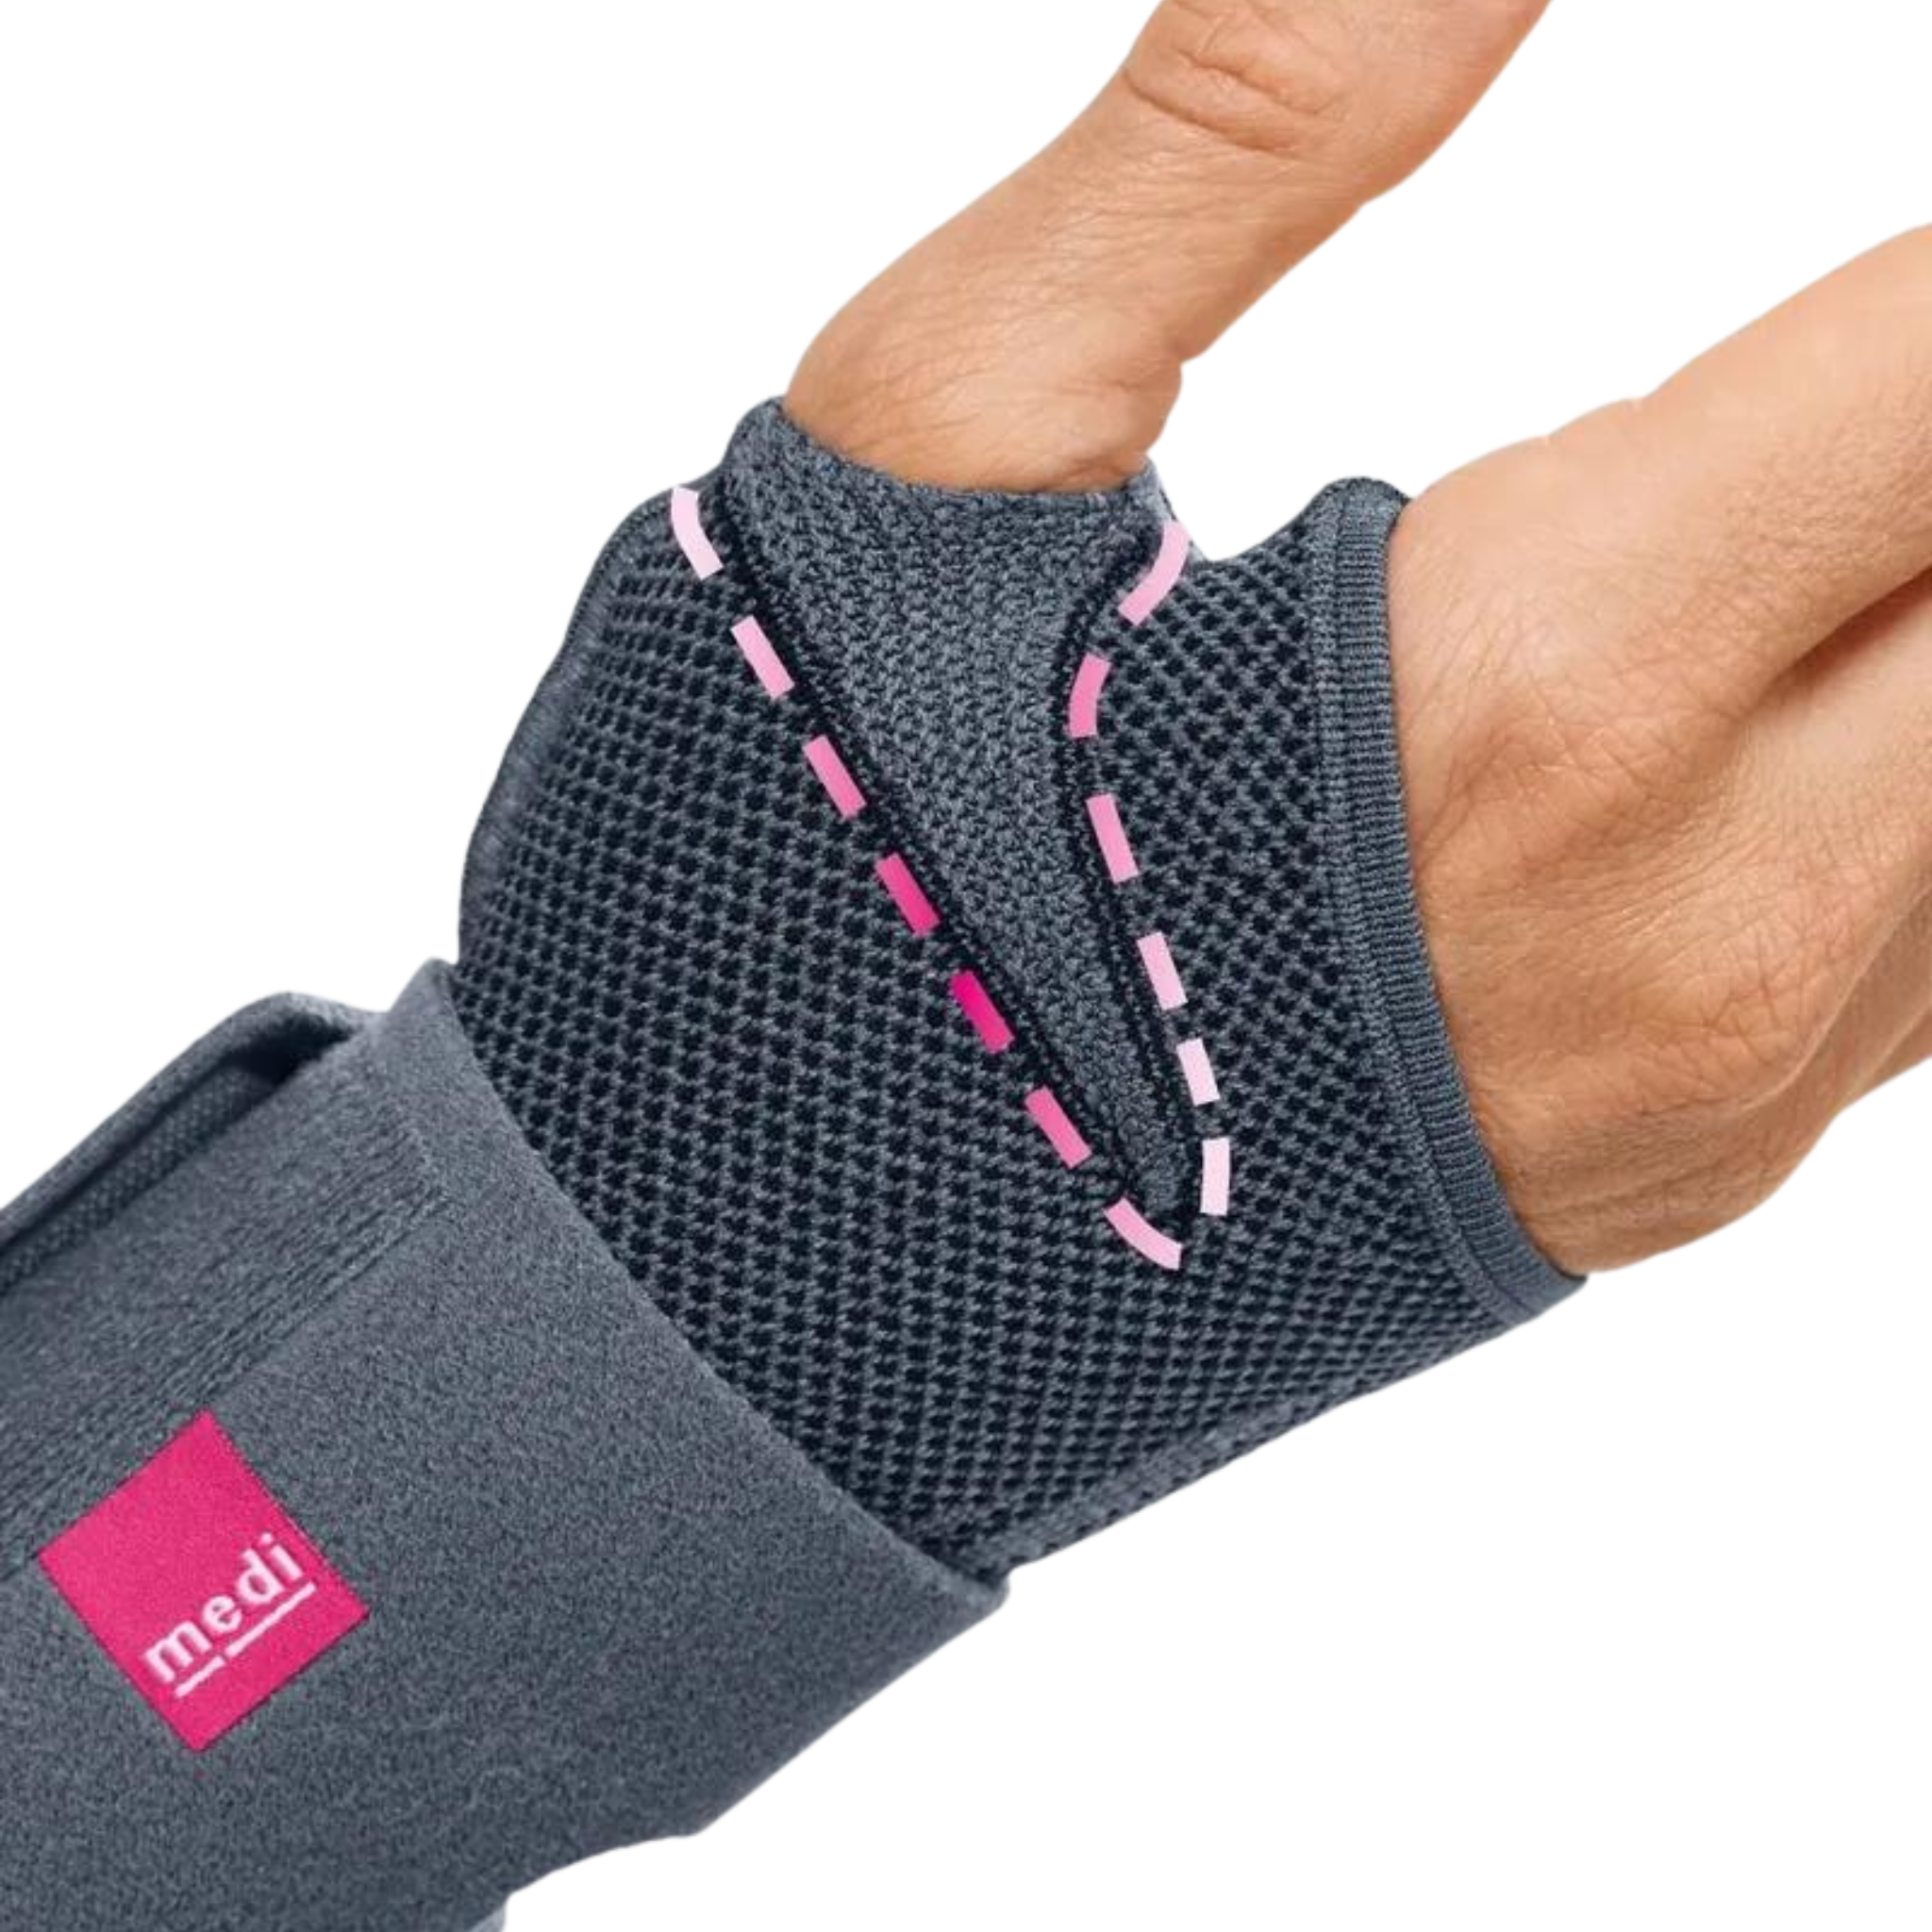 Wrist Support | Manumed active